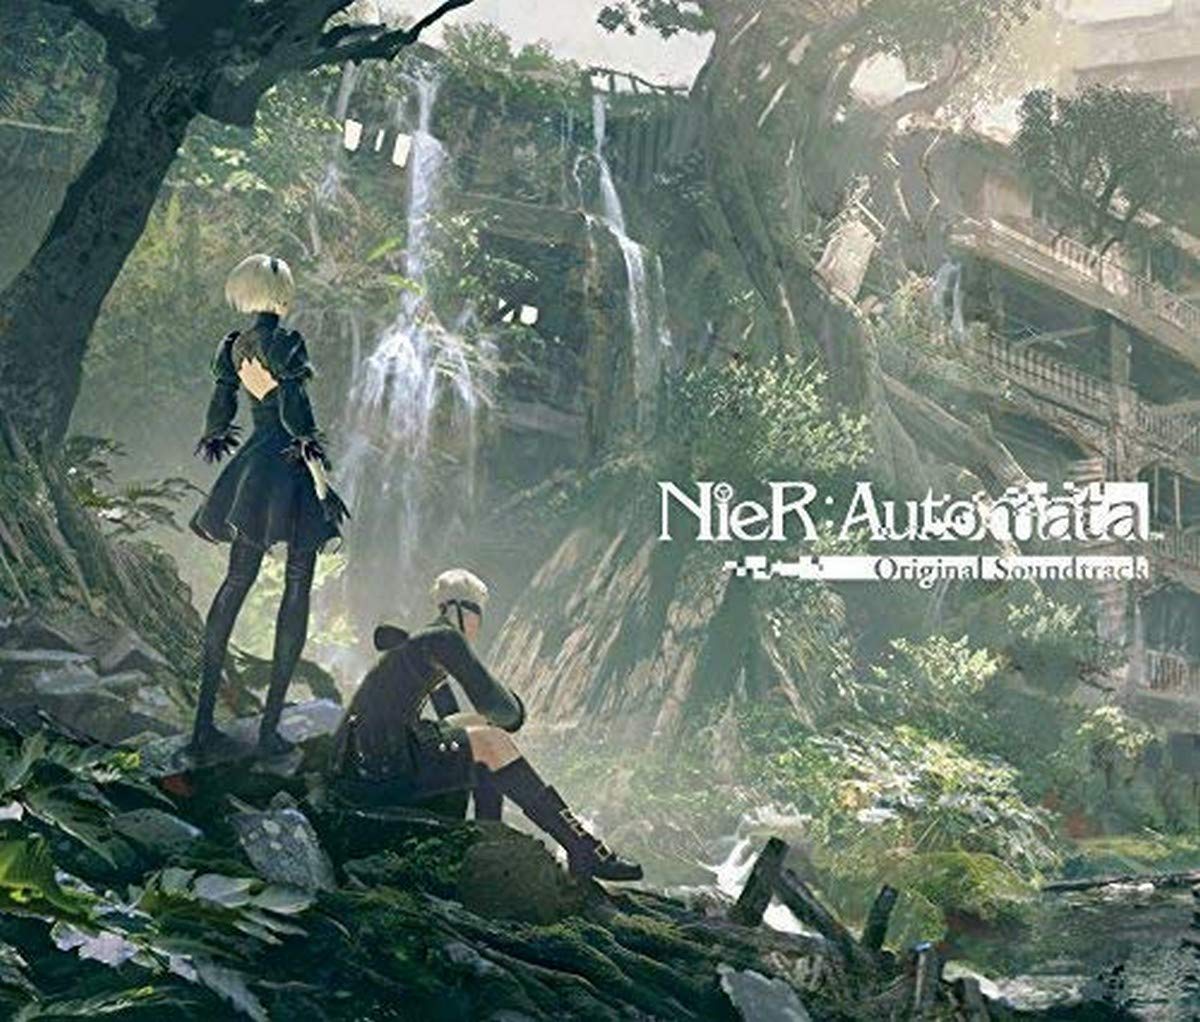 10 Nier: Automata Characters We Can't Wait To See In The Anime